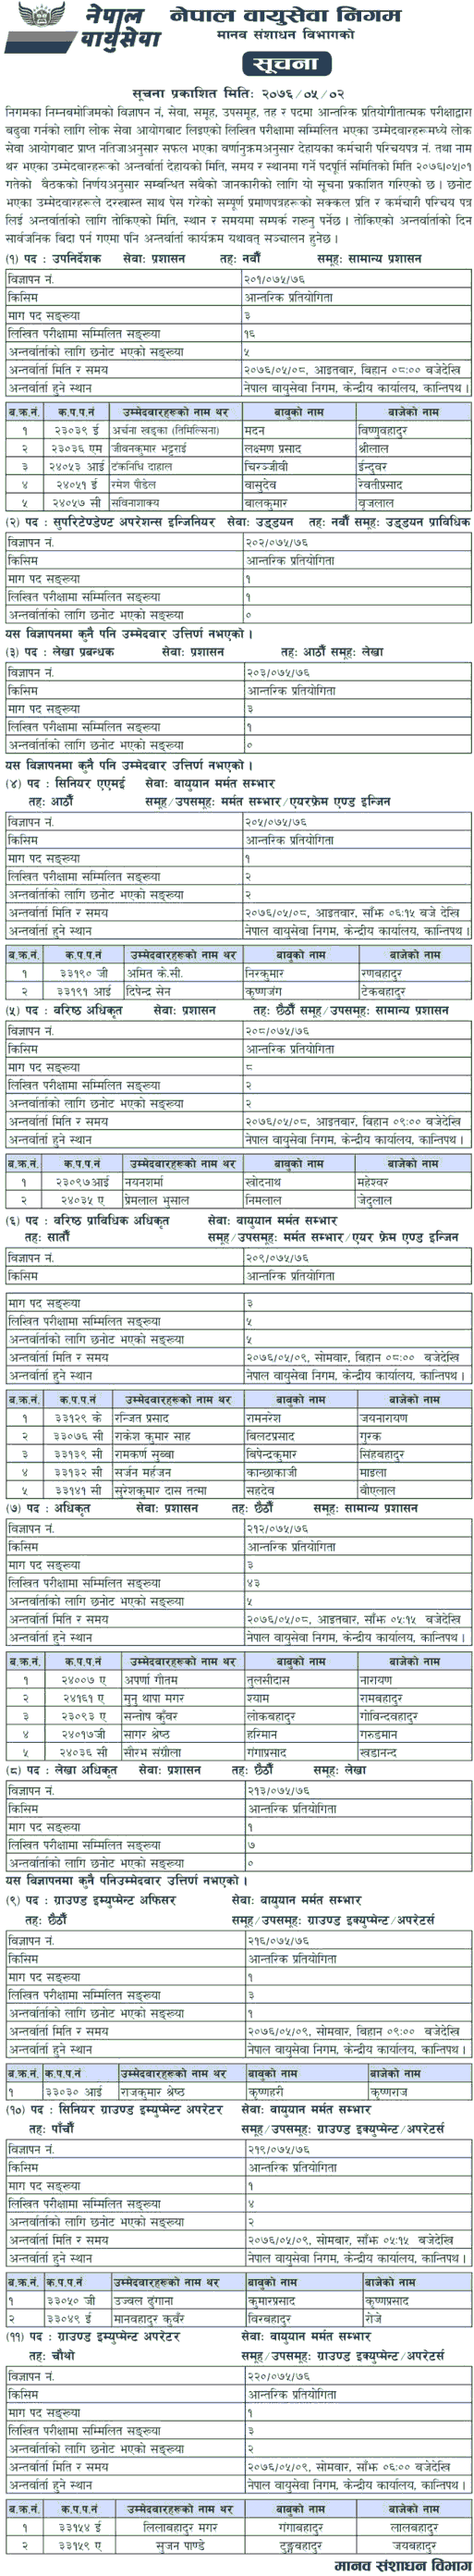 Nepal Airlines Corporation Interview Schedule for Various Positions